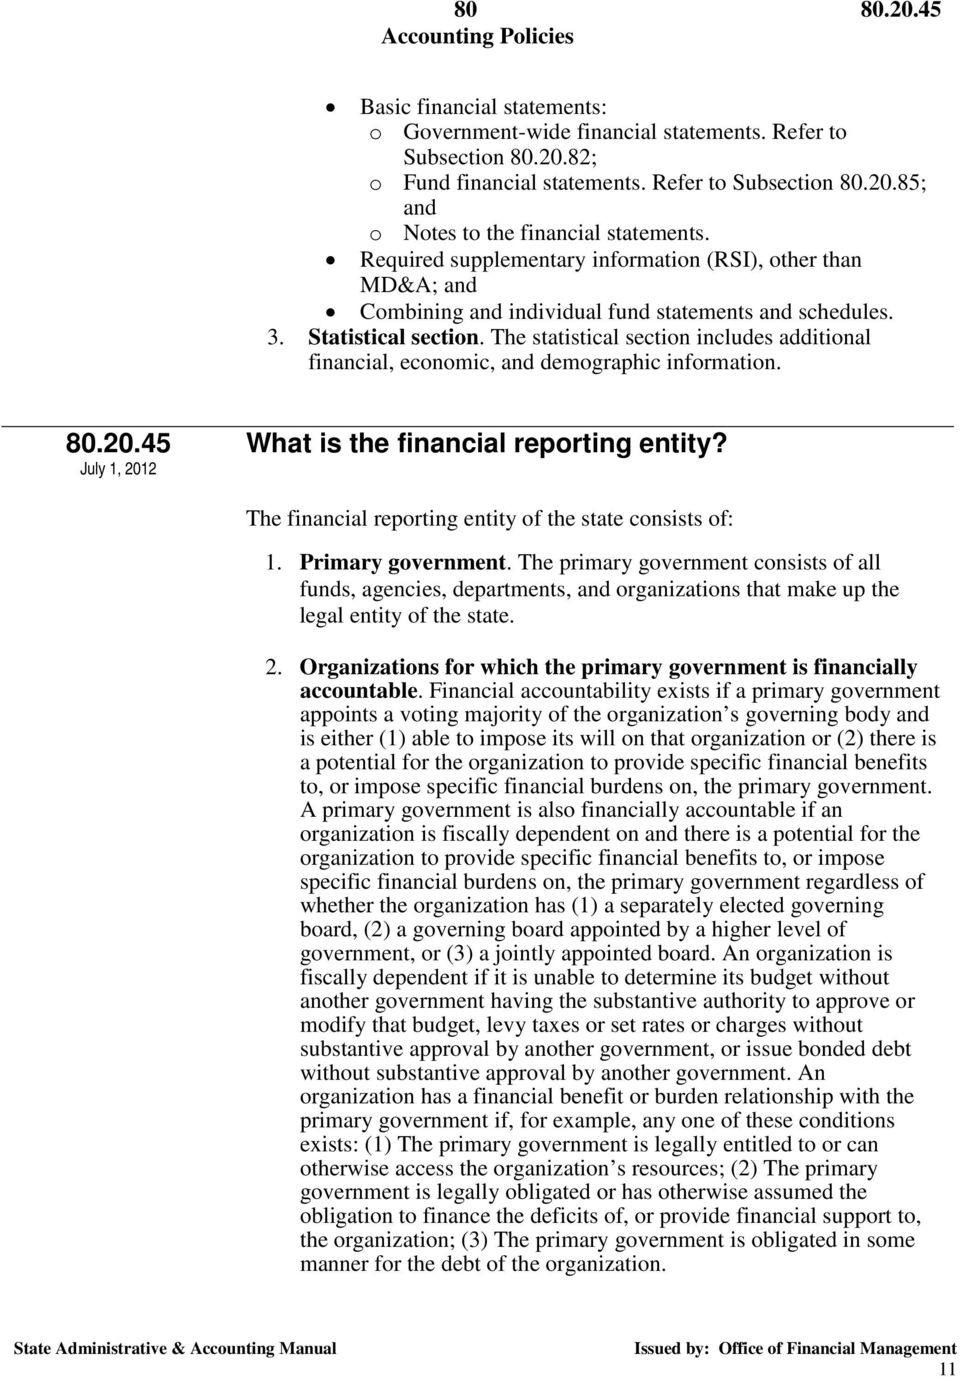 The statistical section includes additional financial, economic, and demographic information. 80.20.45 July 1, 2012 What is the financial reporting entity?